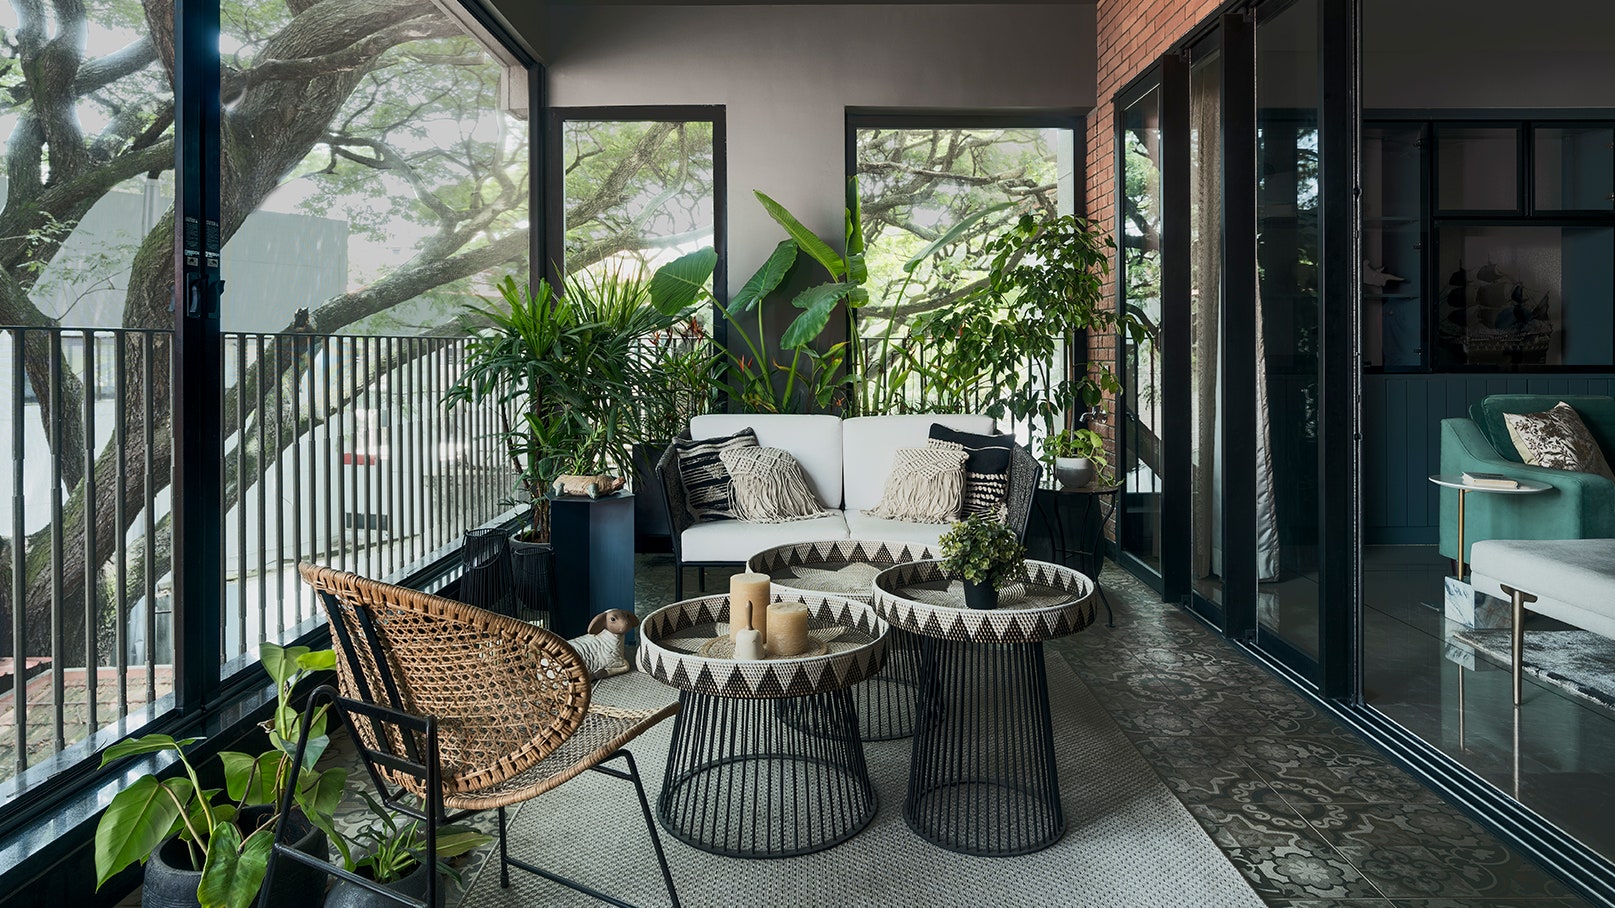 Creating an Elegant Patio Setting on a Budget